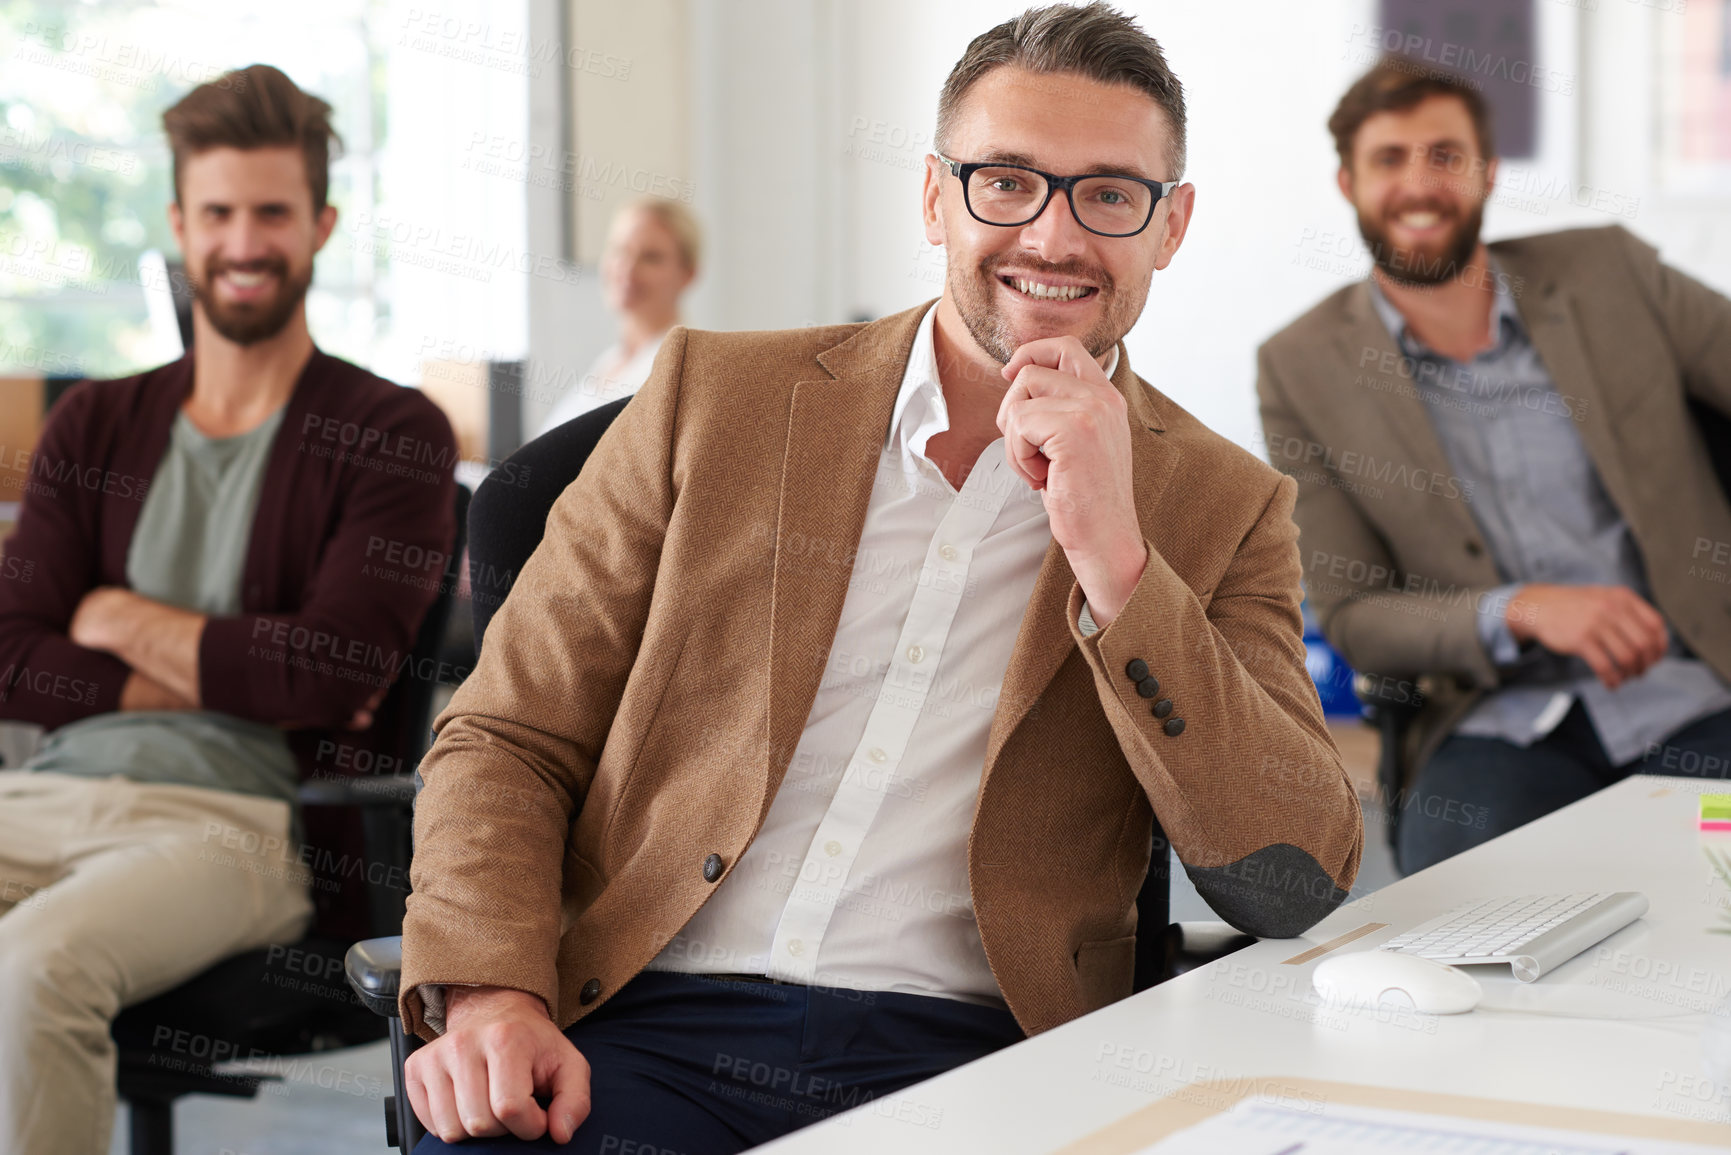 Buy stock photo Smiling mature professional with colleagues in the background
